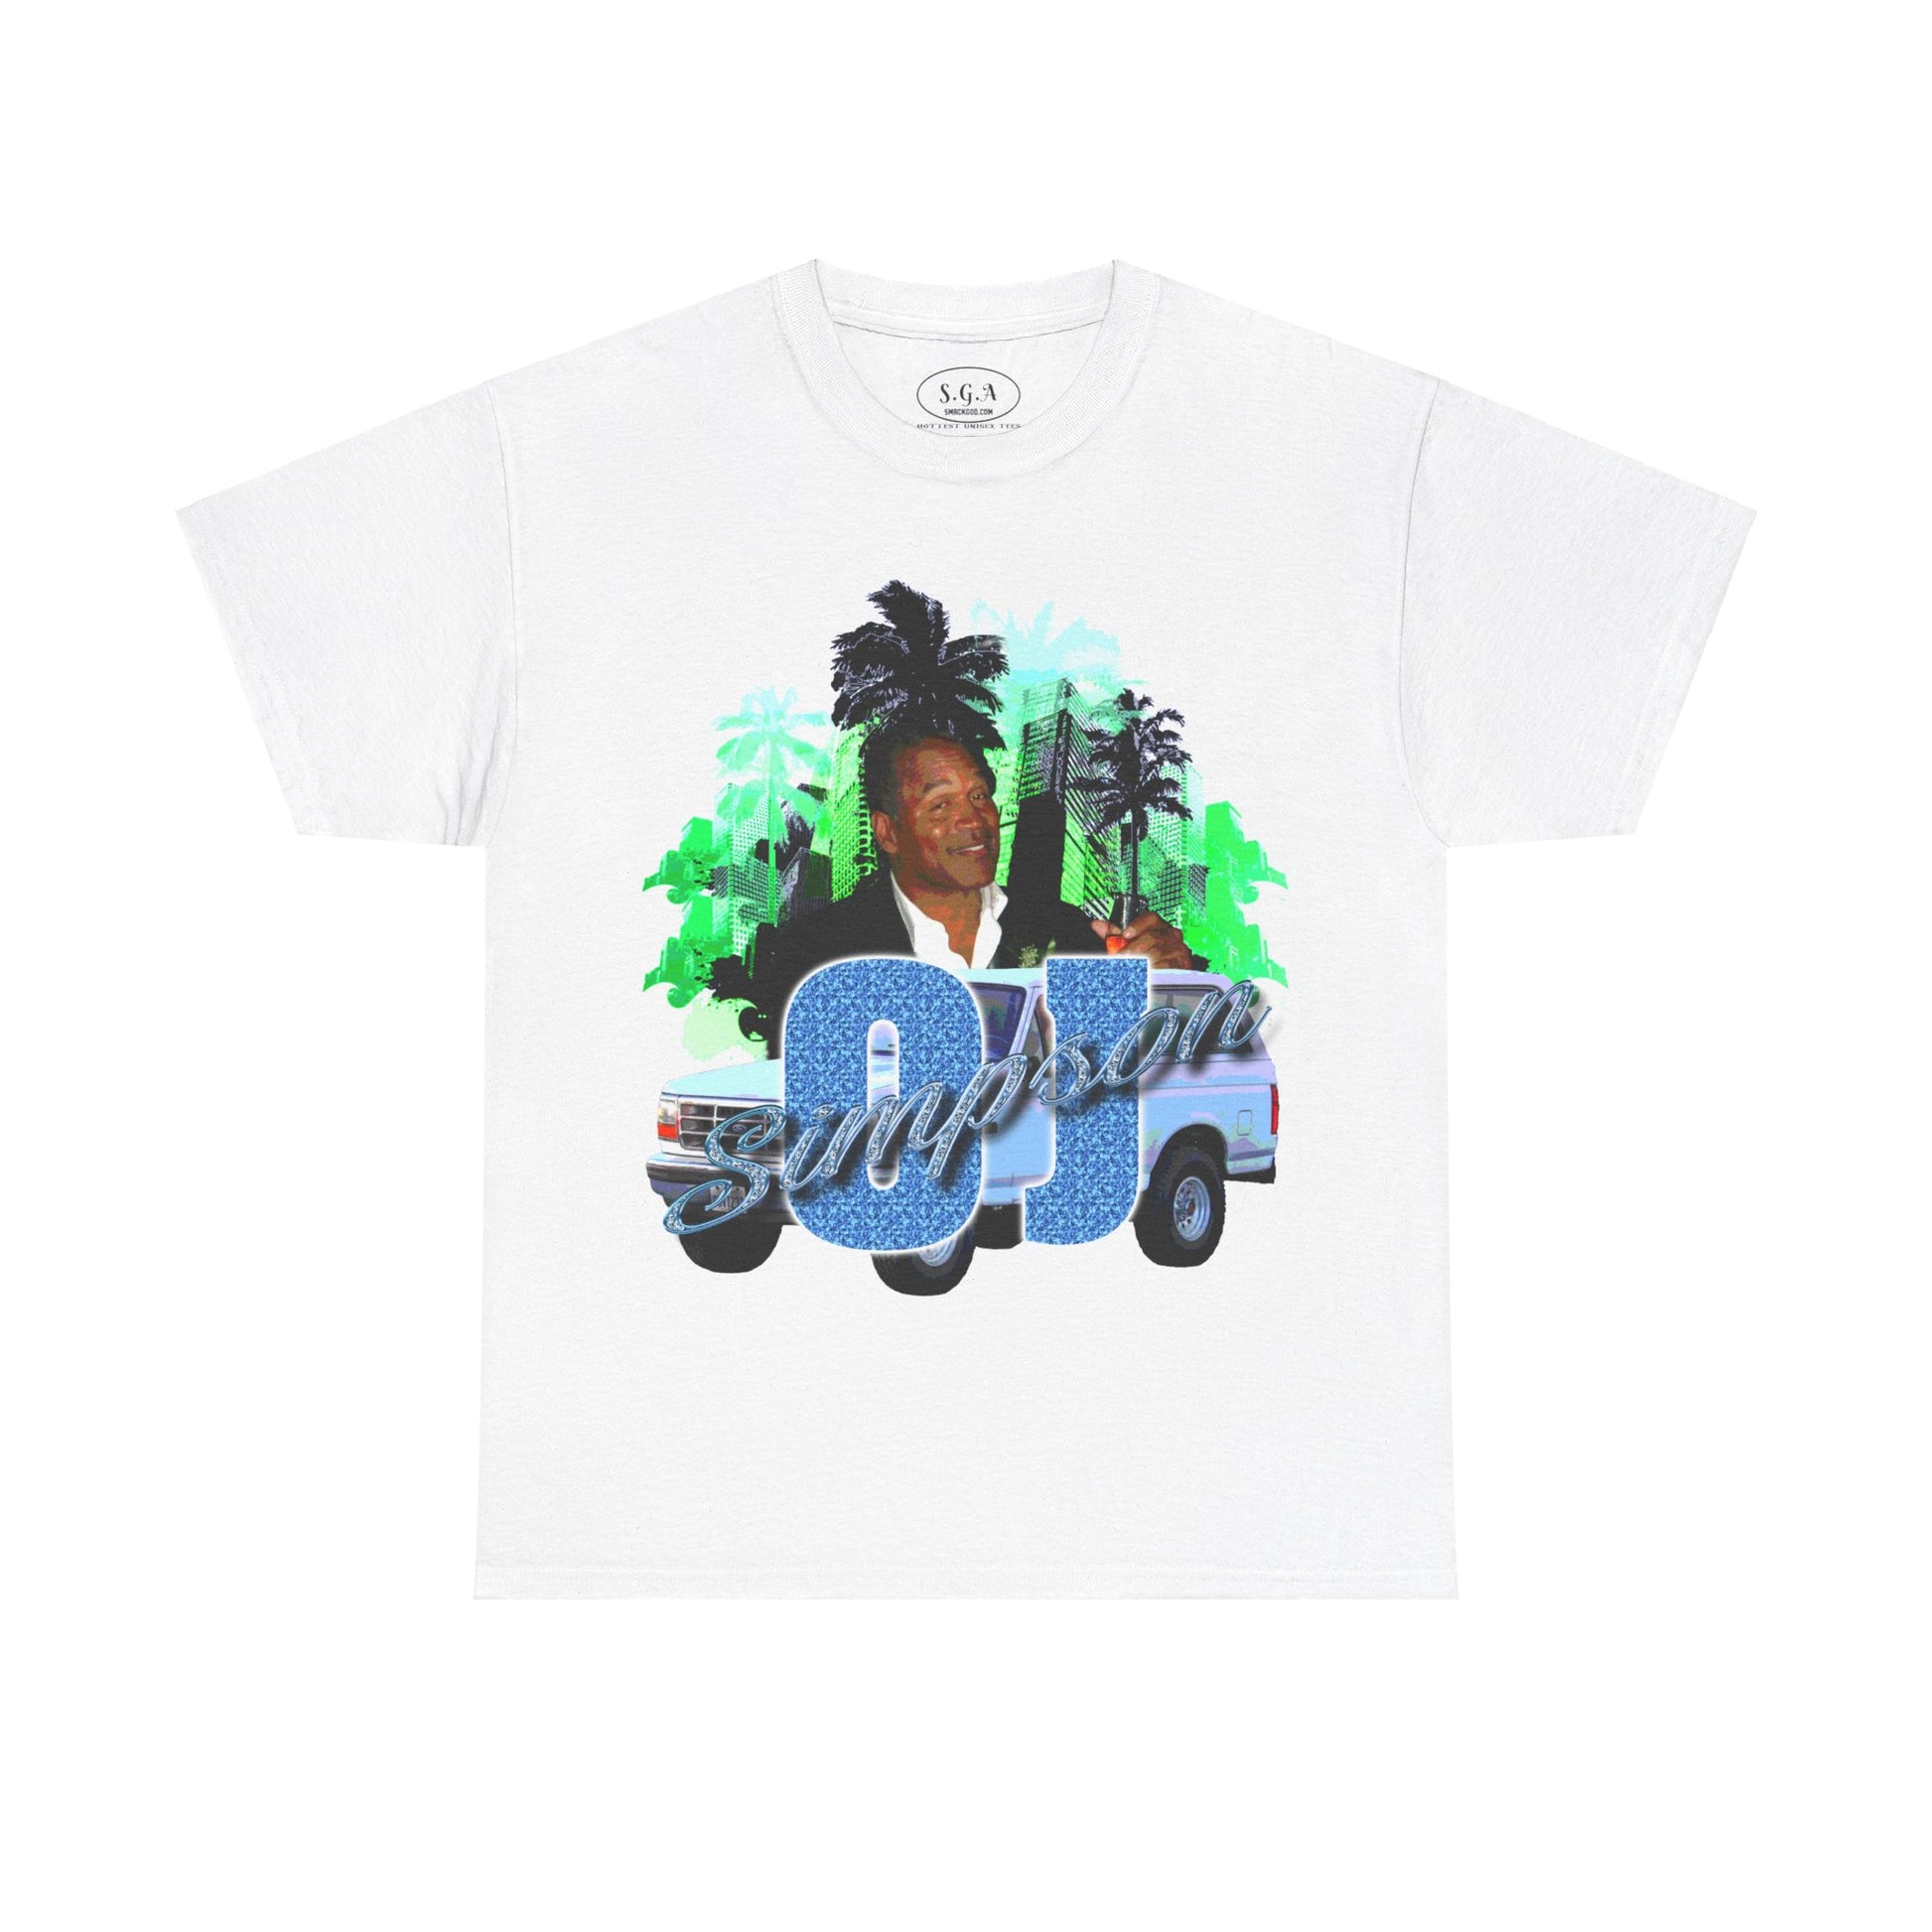 "O.J. Simpson Party Lifestyle T-Shirt from Smack God Apparel - Streetwear"